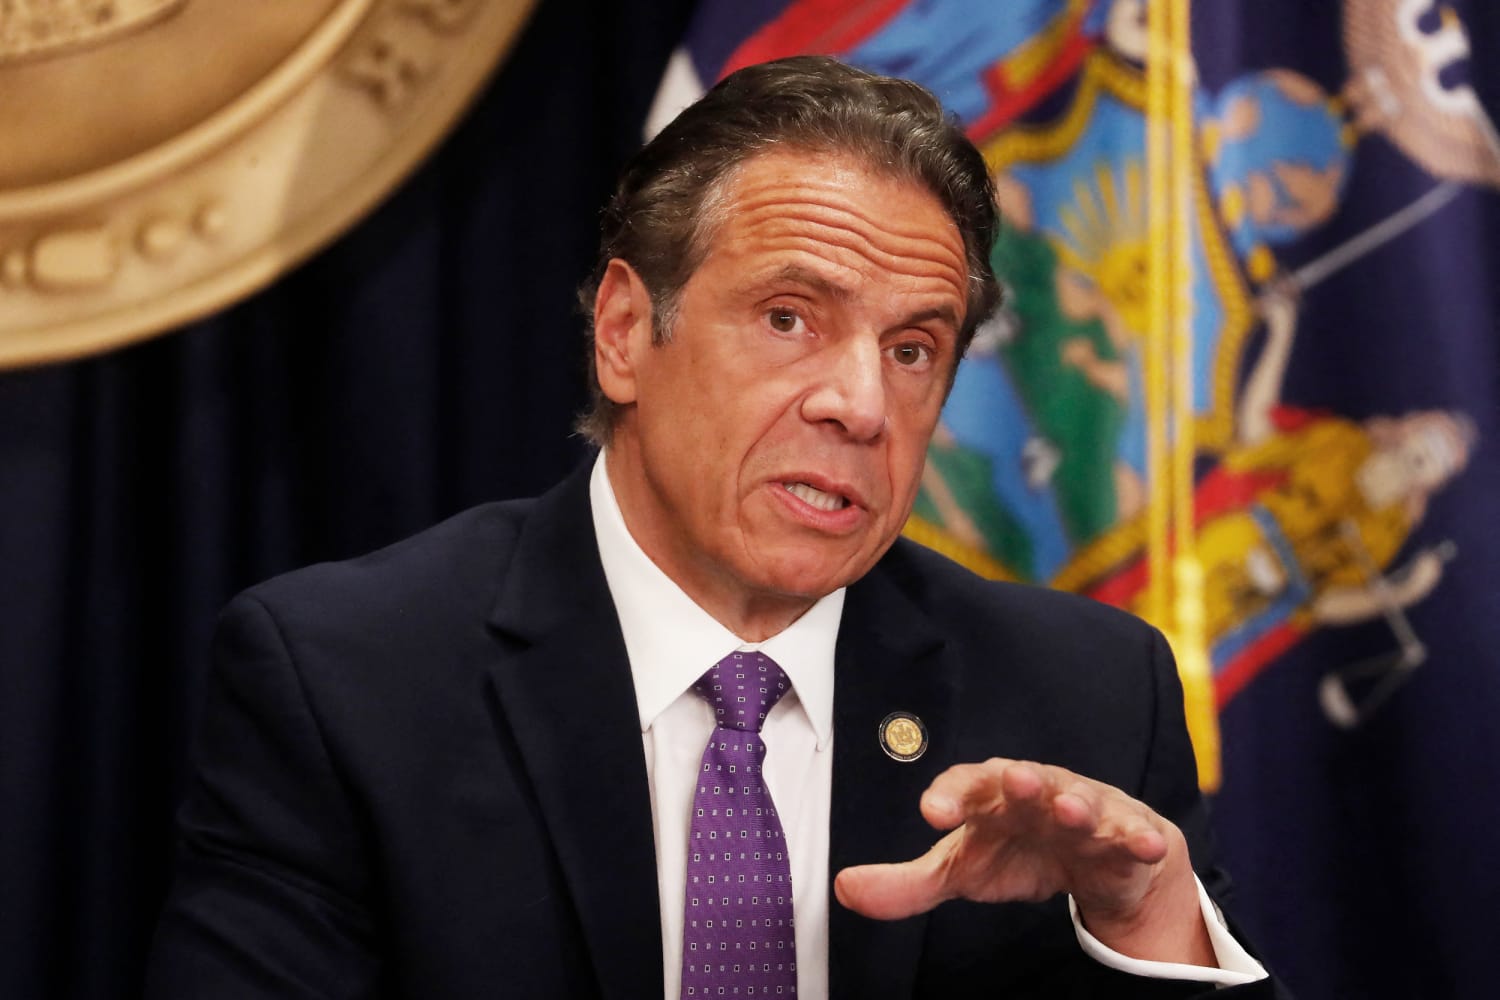 State ethics board orders Andrew Cuomo to give up $5.1 million book advance